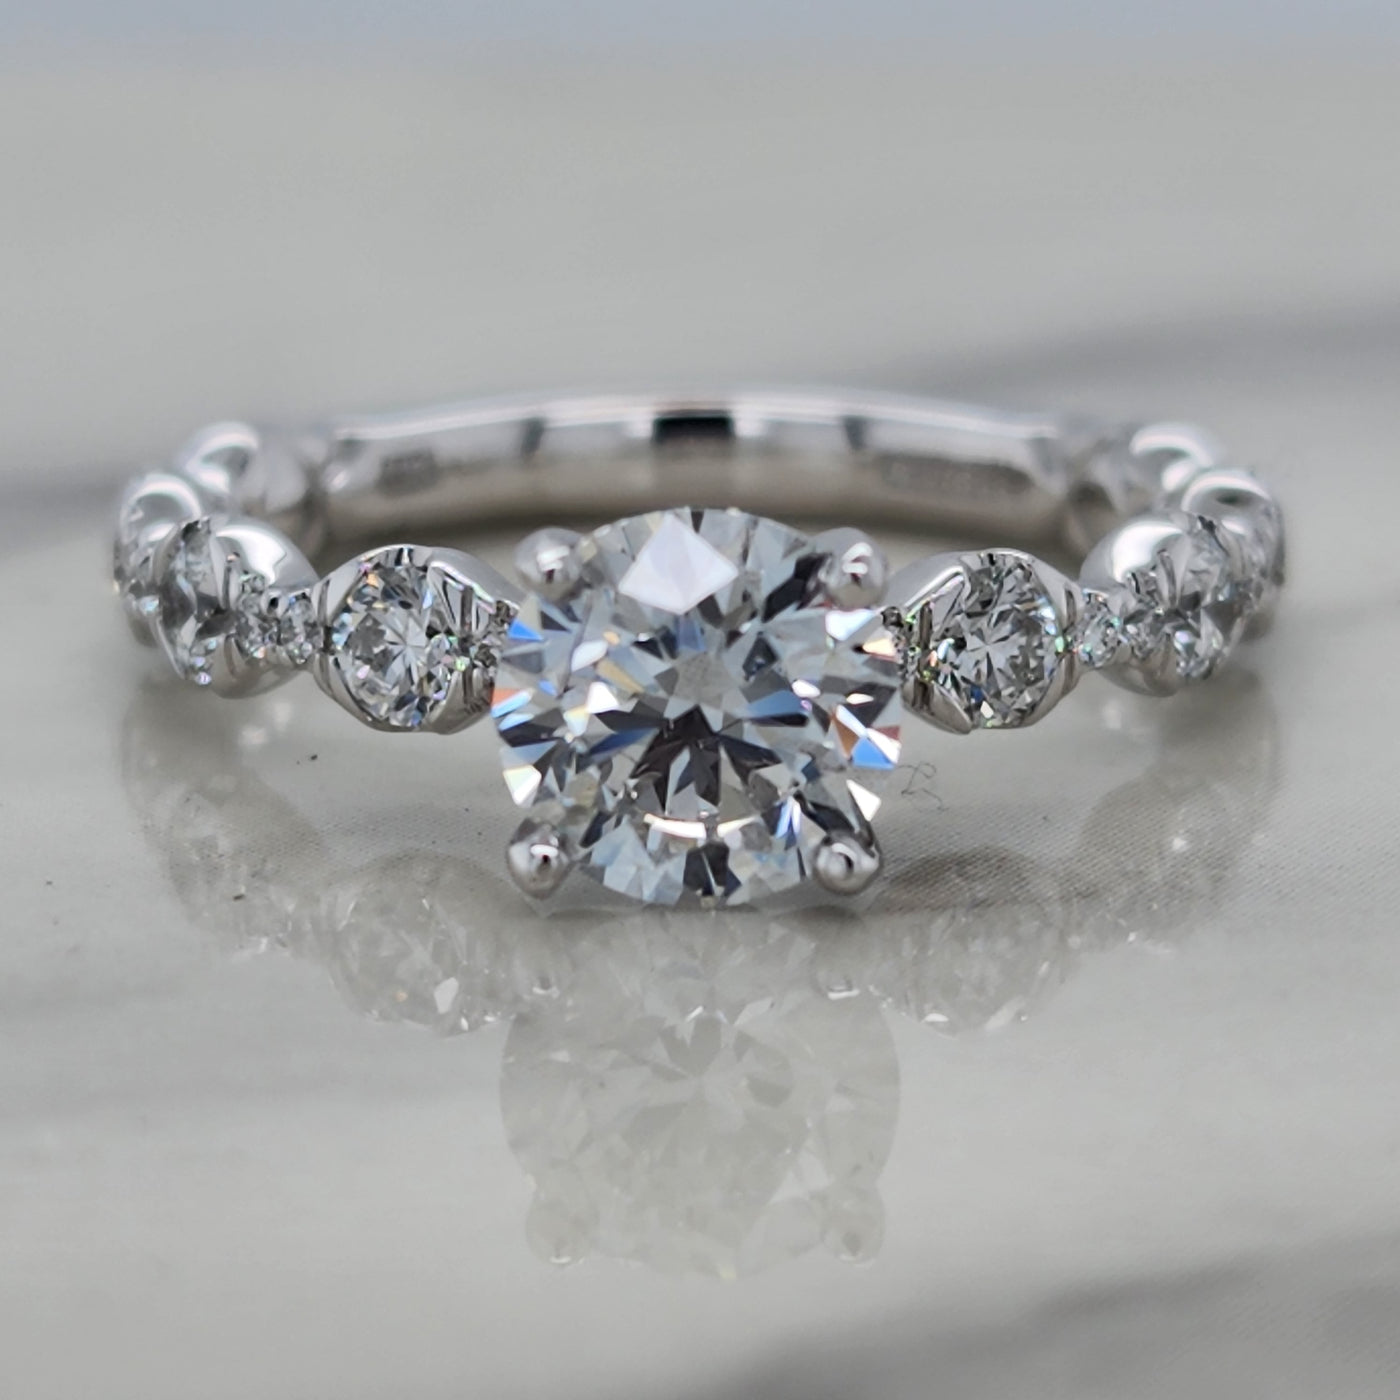 White Gold Engagement Ring With Round Center Diamond and Round Accents